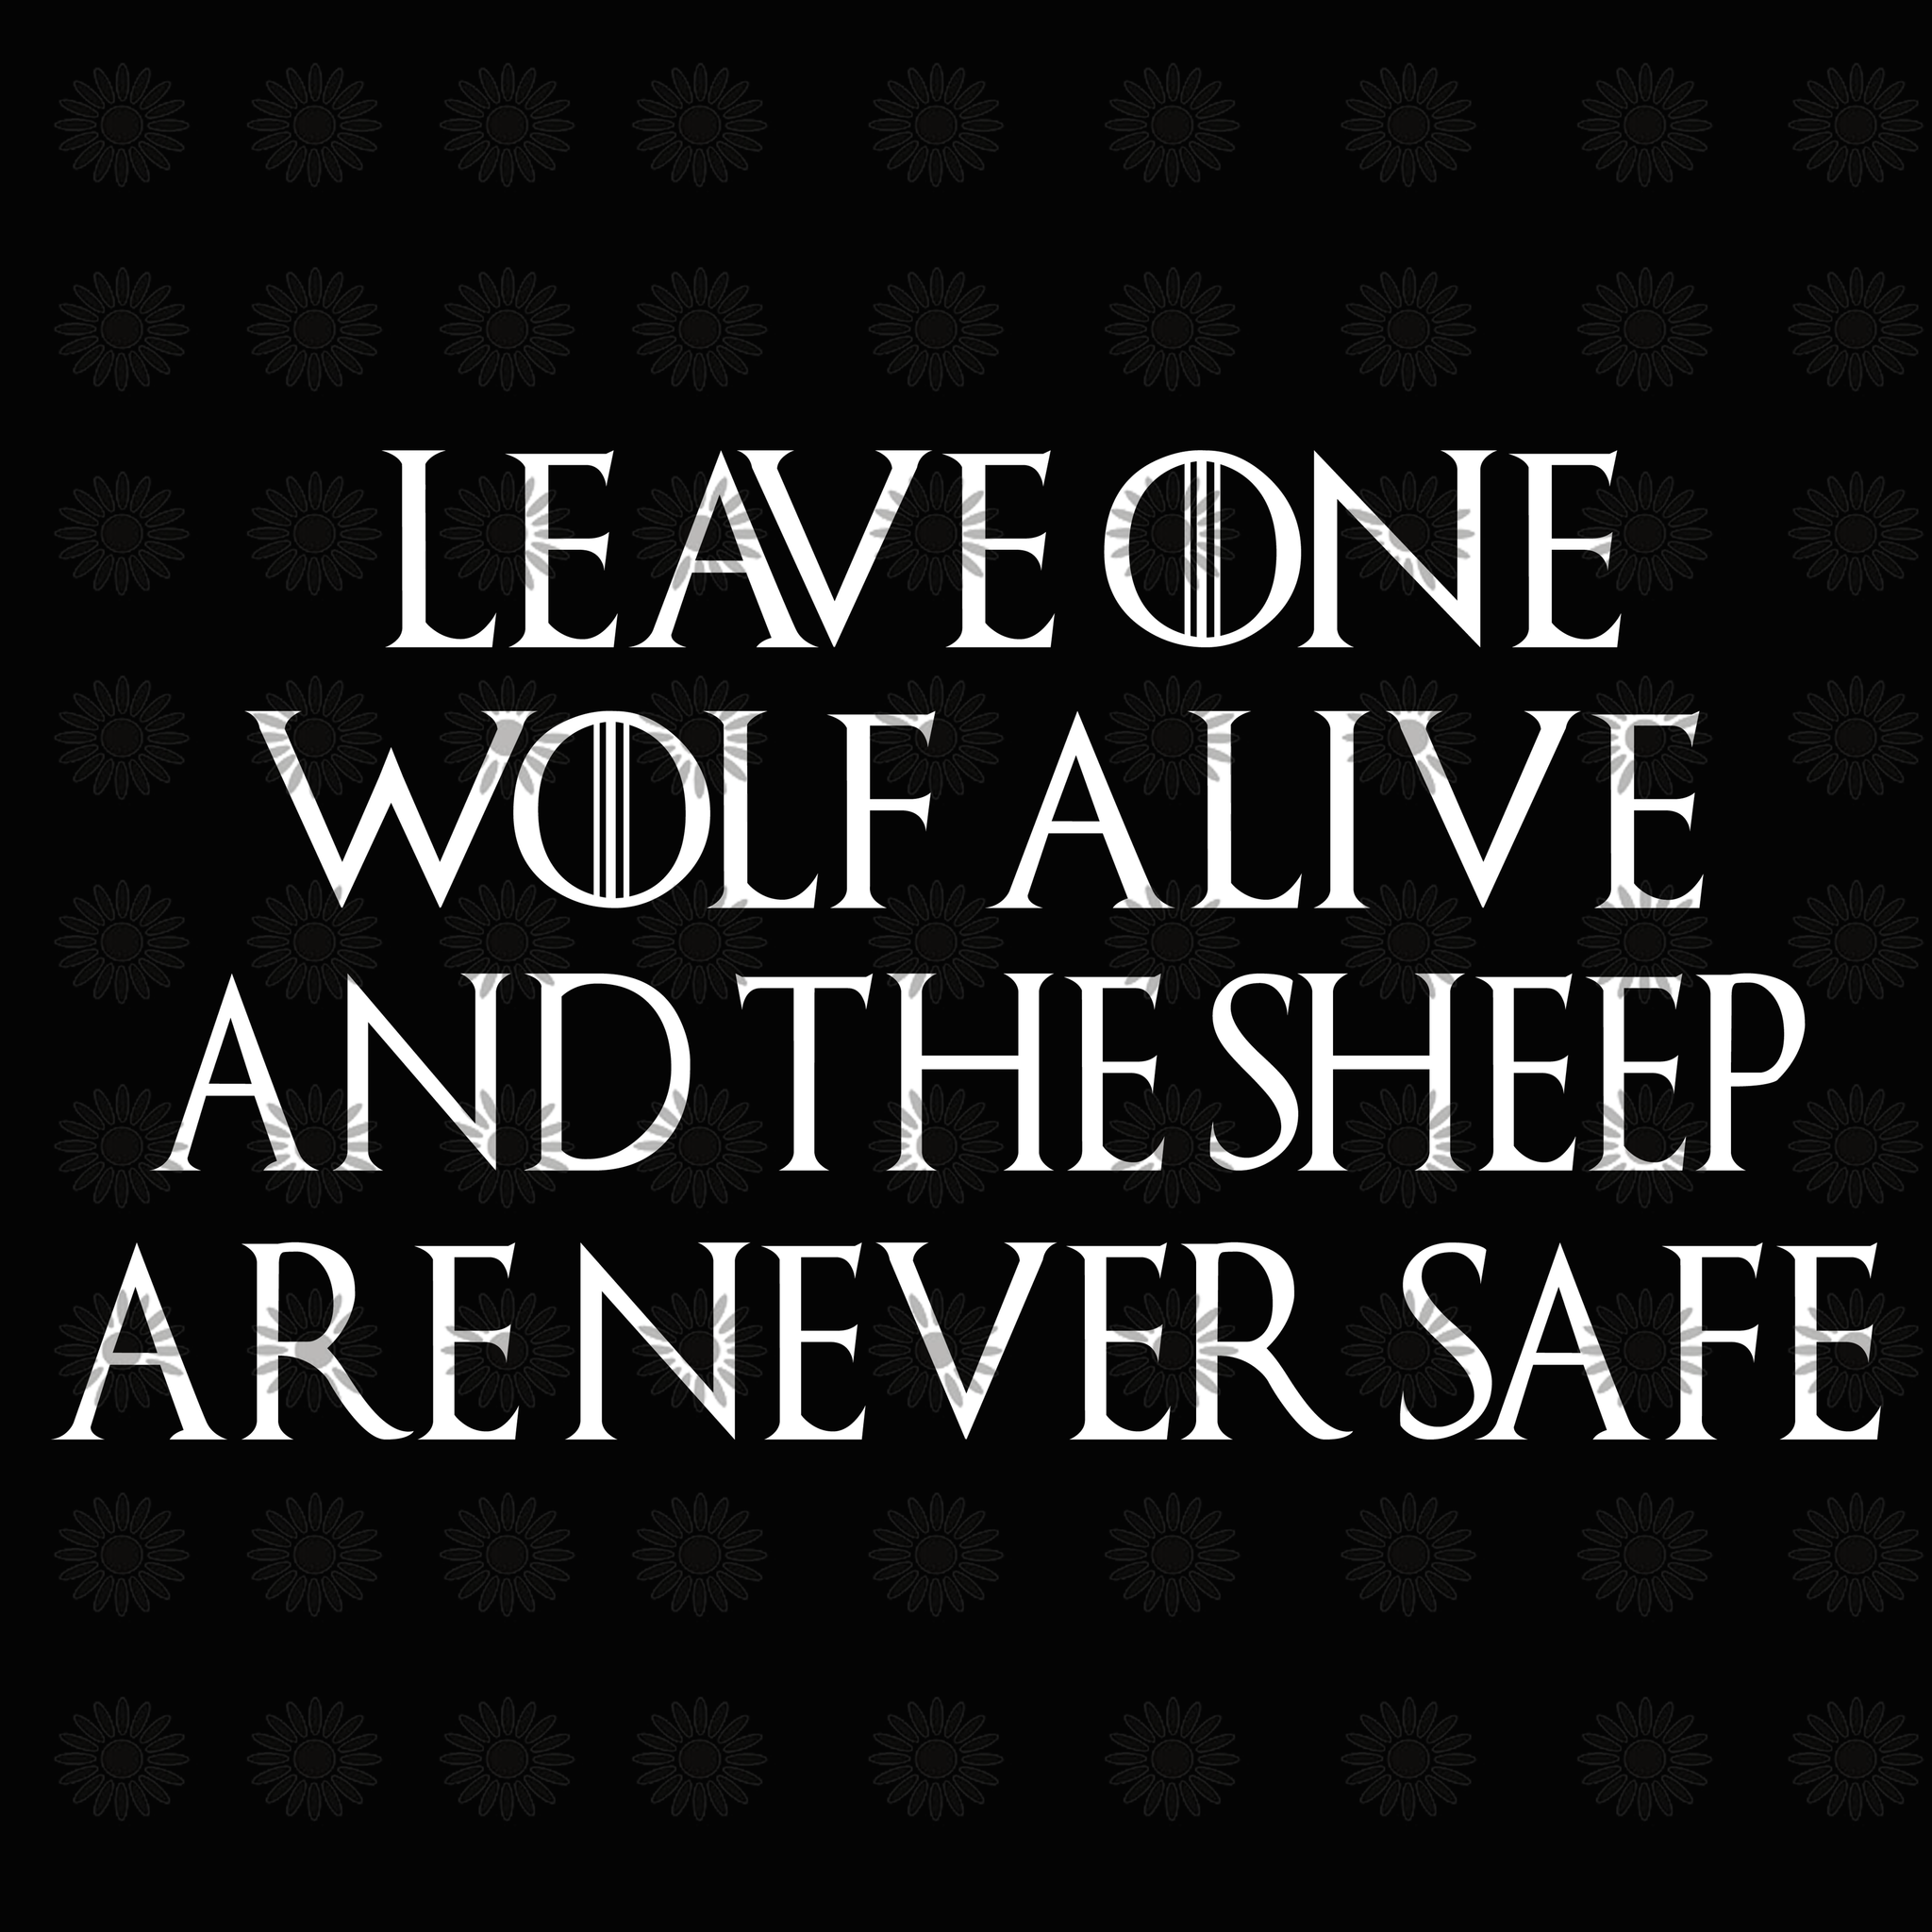 Leave one wolf alive and the sheep are never safe svg, Leave one wolf alive and the sheep are never safe, funny quotes svg, png, eps, dxf file